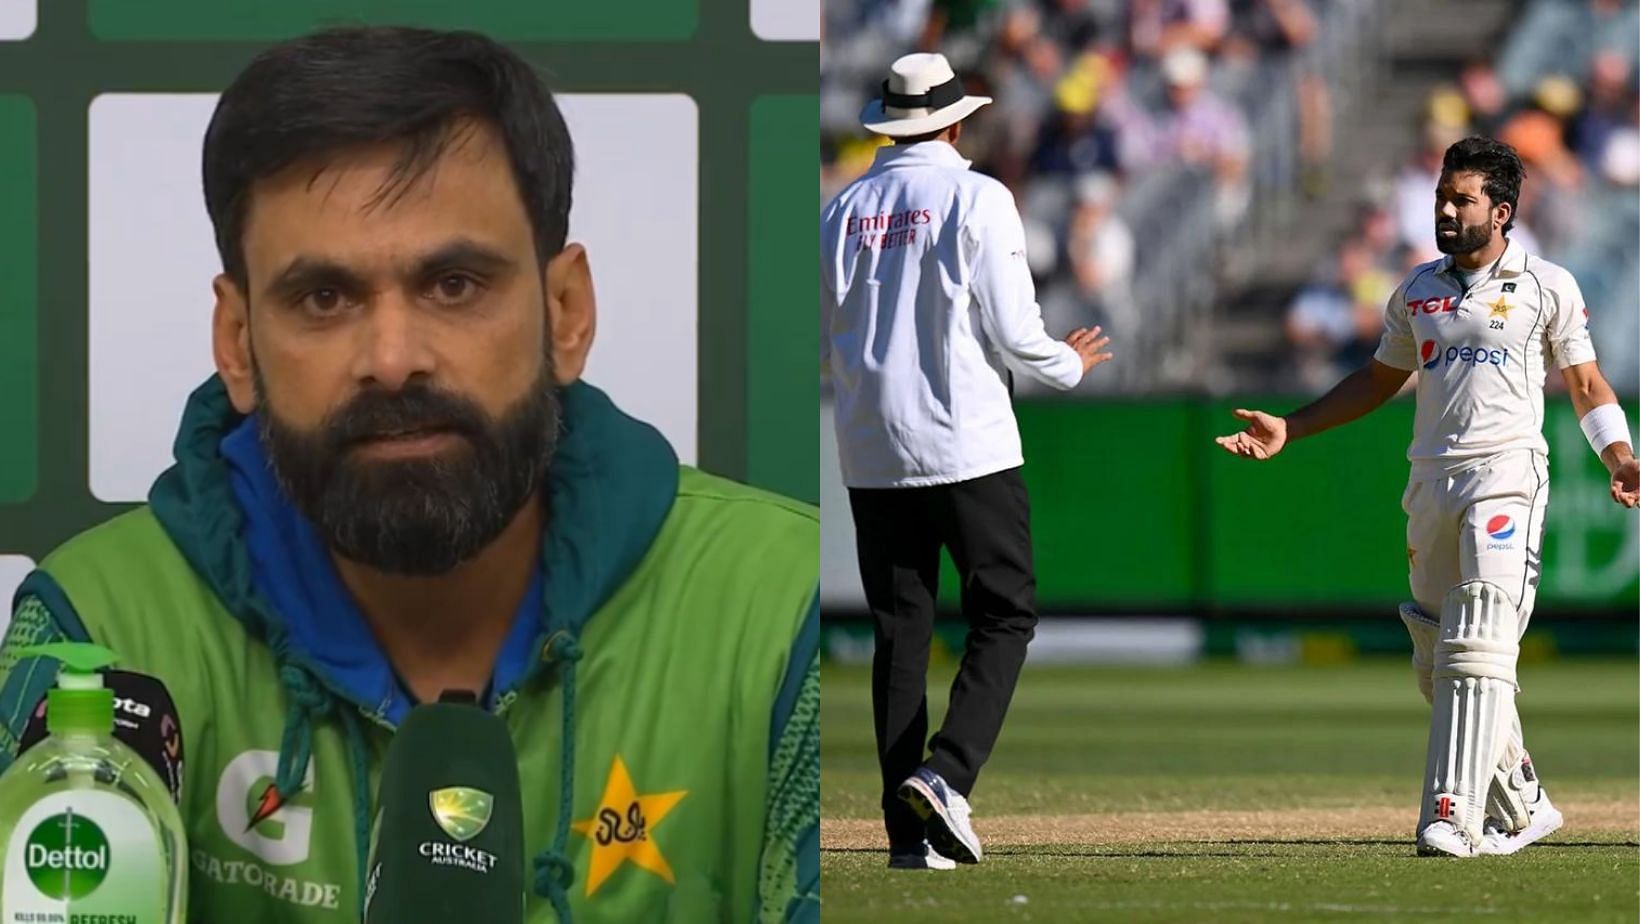 On the Mohammad Rizwan incident, Hafeez said technology is a &quot;curse&quot; on cricket.